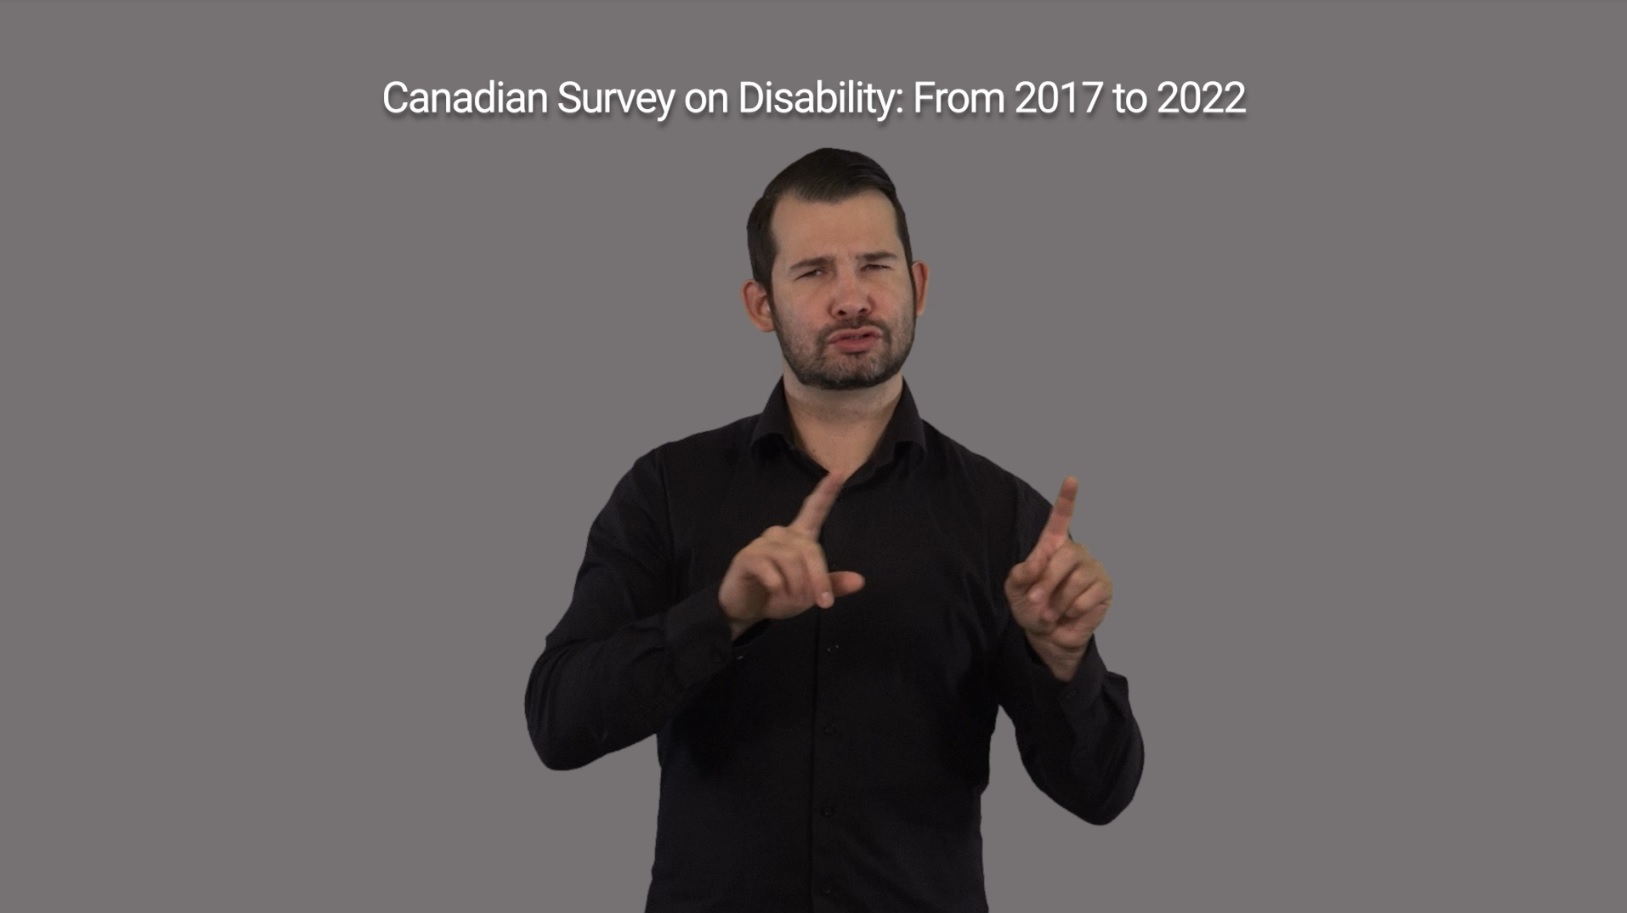 Canadian Survey on Disability: From 2017 to 2022, American Sign Language